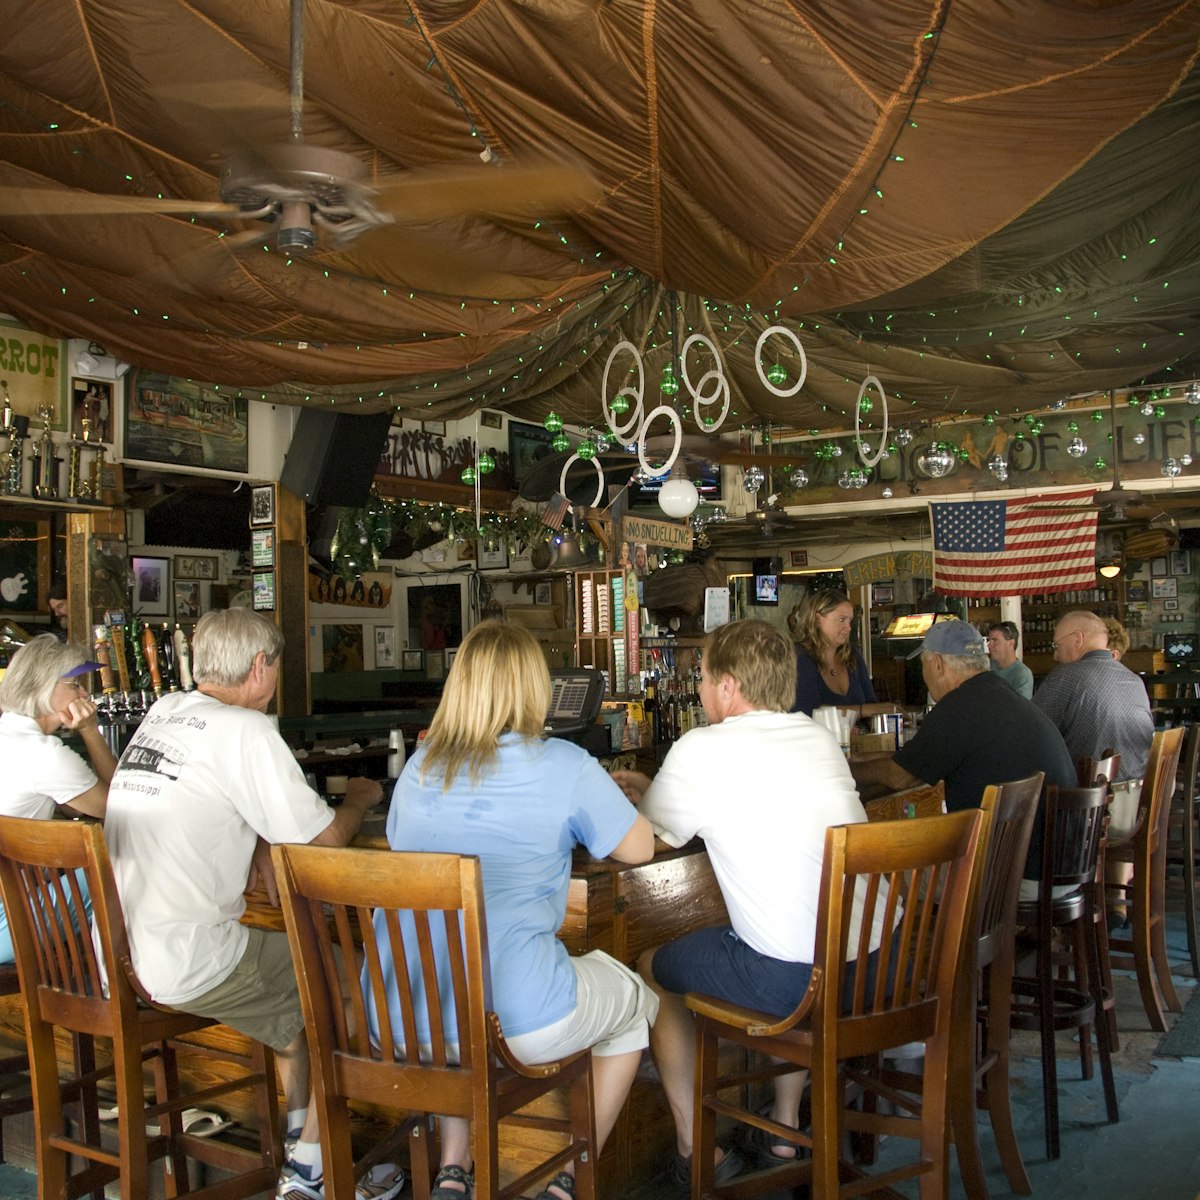 Lunchtime at the Green Parrot Bar in downtown Key West.